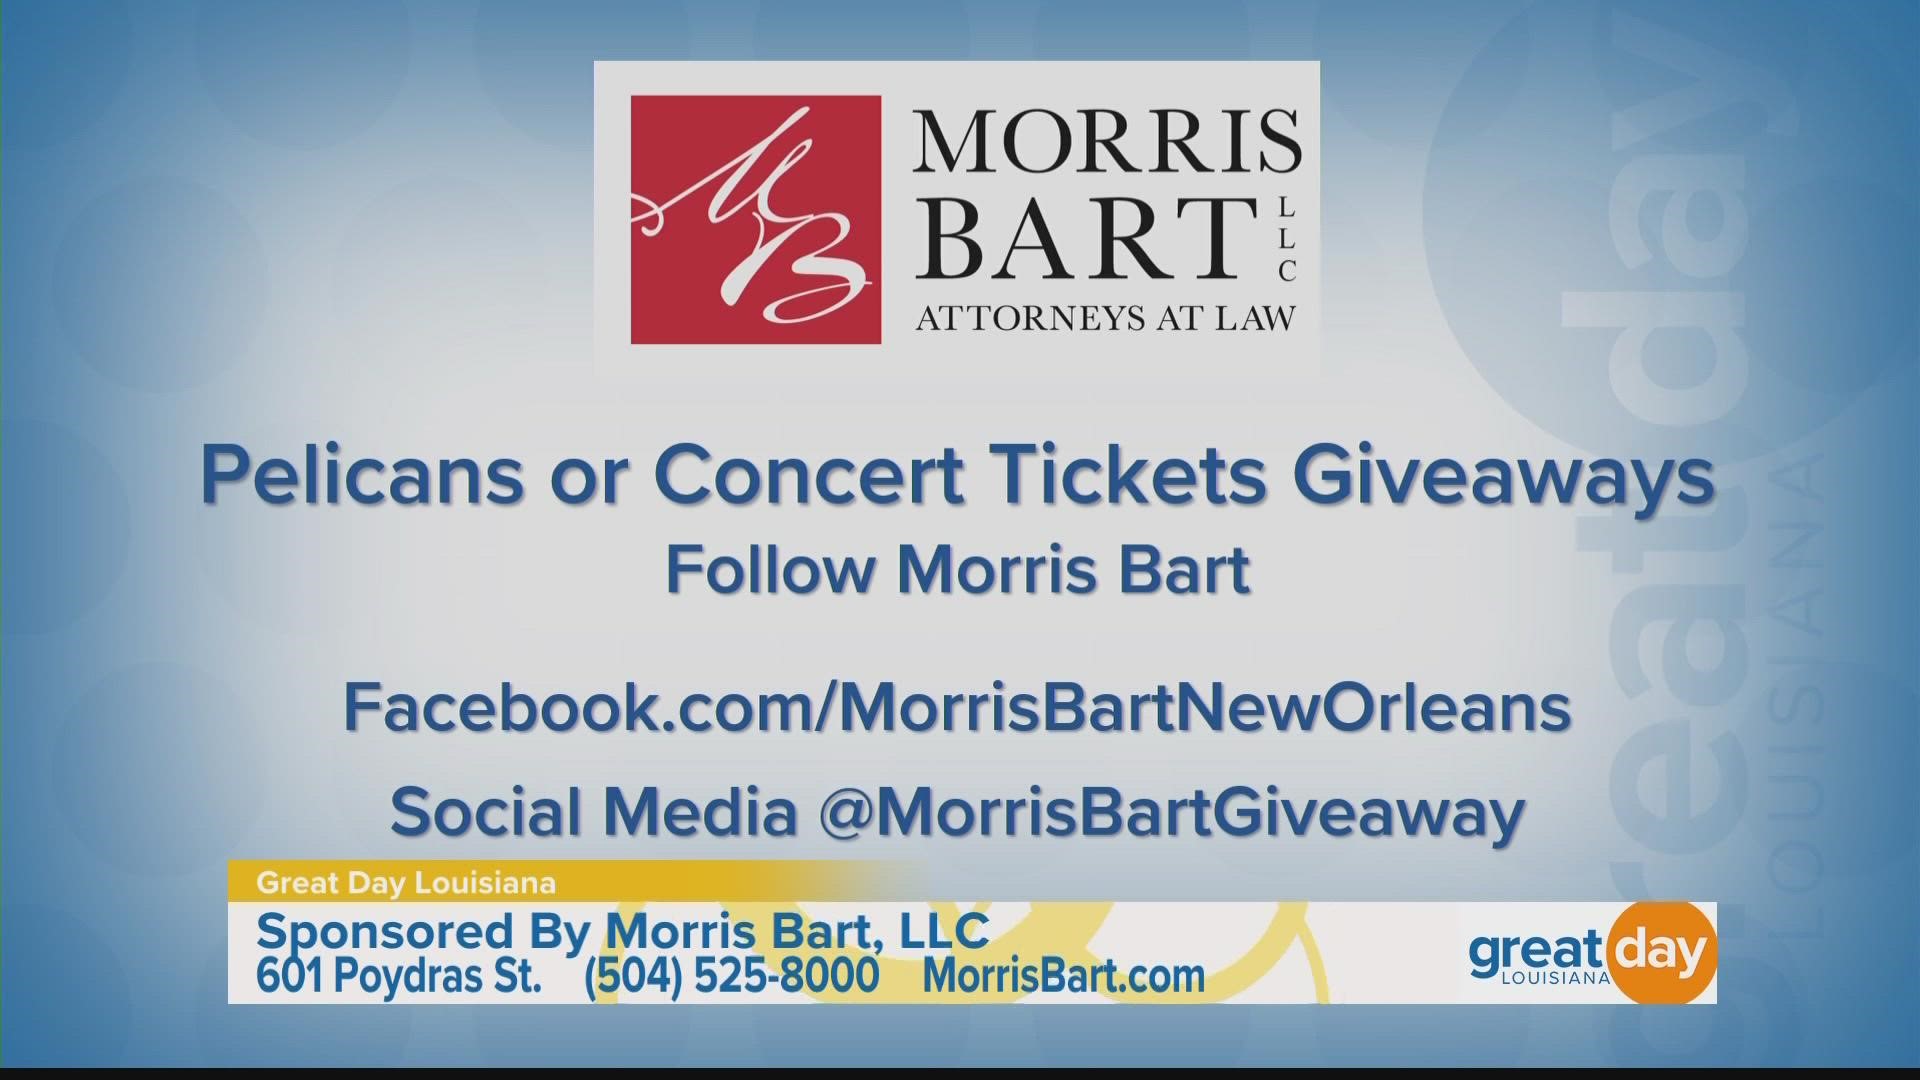 Morris Bart is giving away tickets to all home Pelicans games, as well as tickets to live concerts to help promote the greatness of New Orleans.